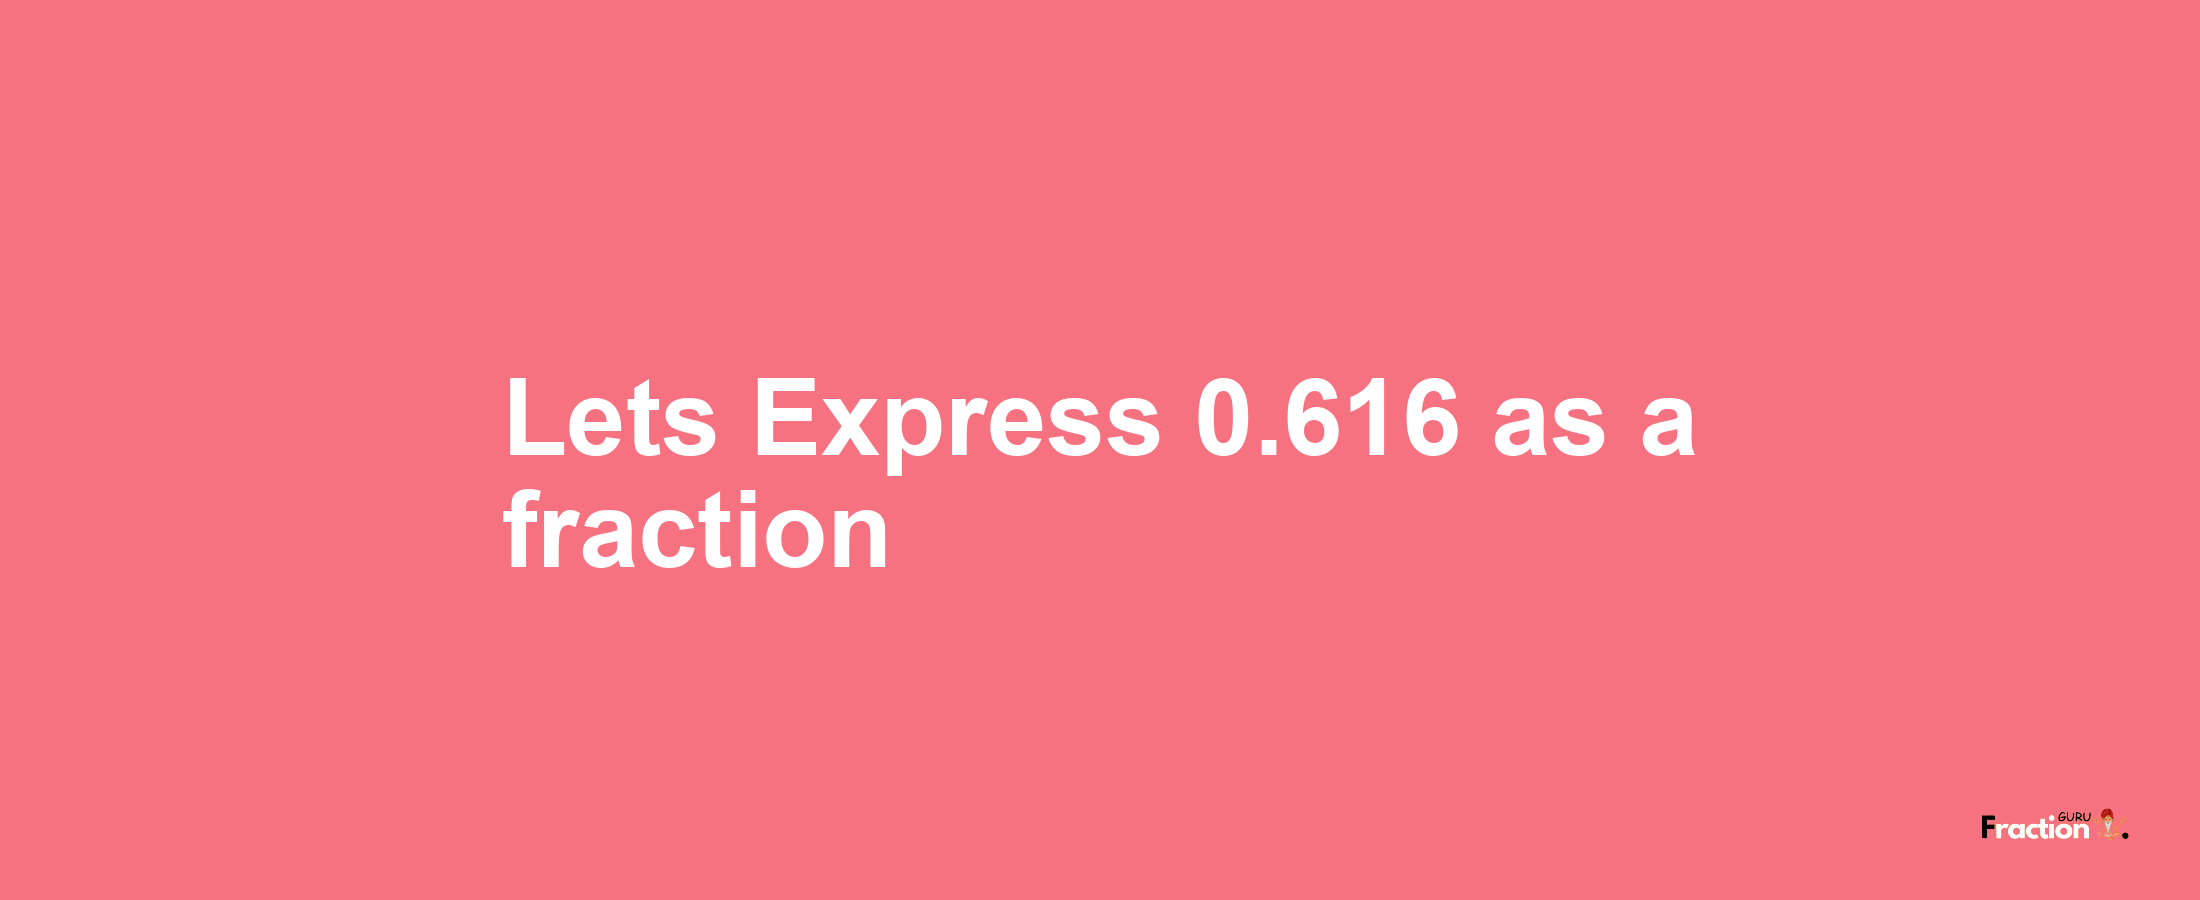 Lets Express 0.616 as afraction